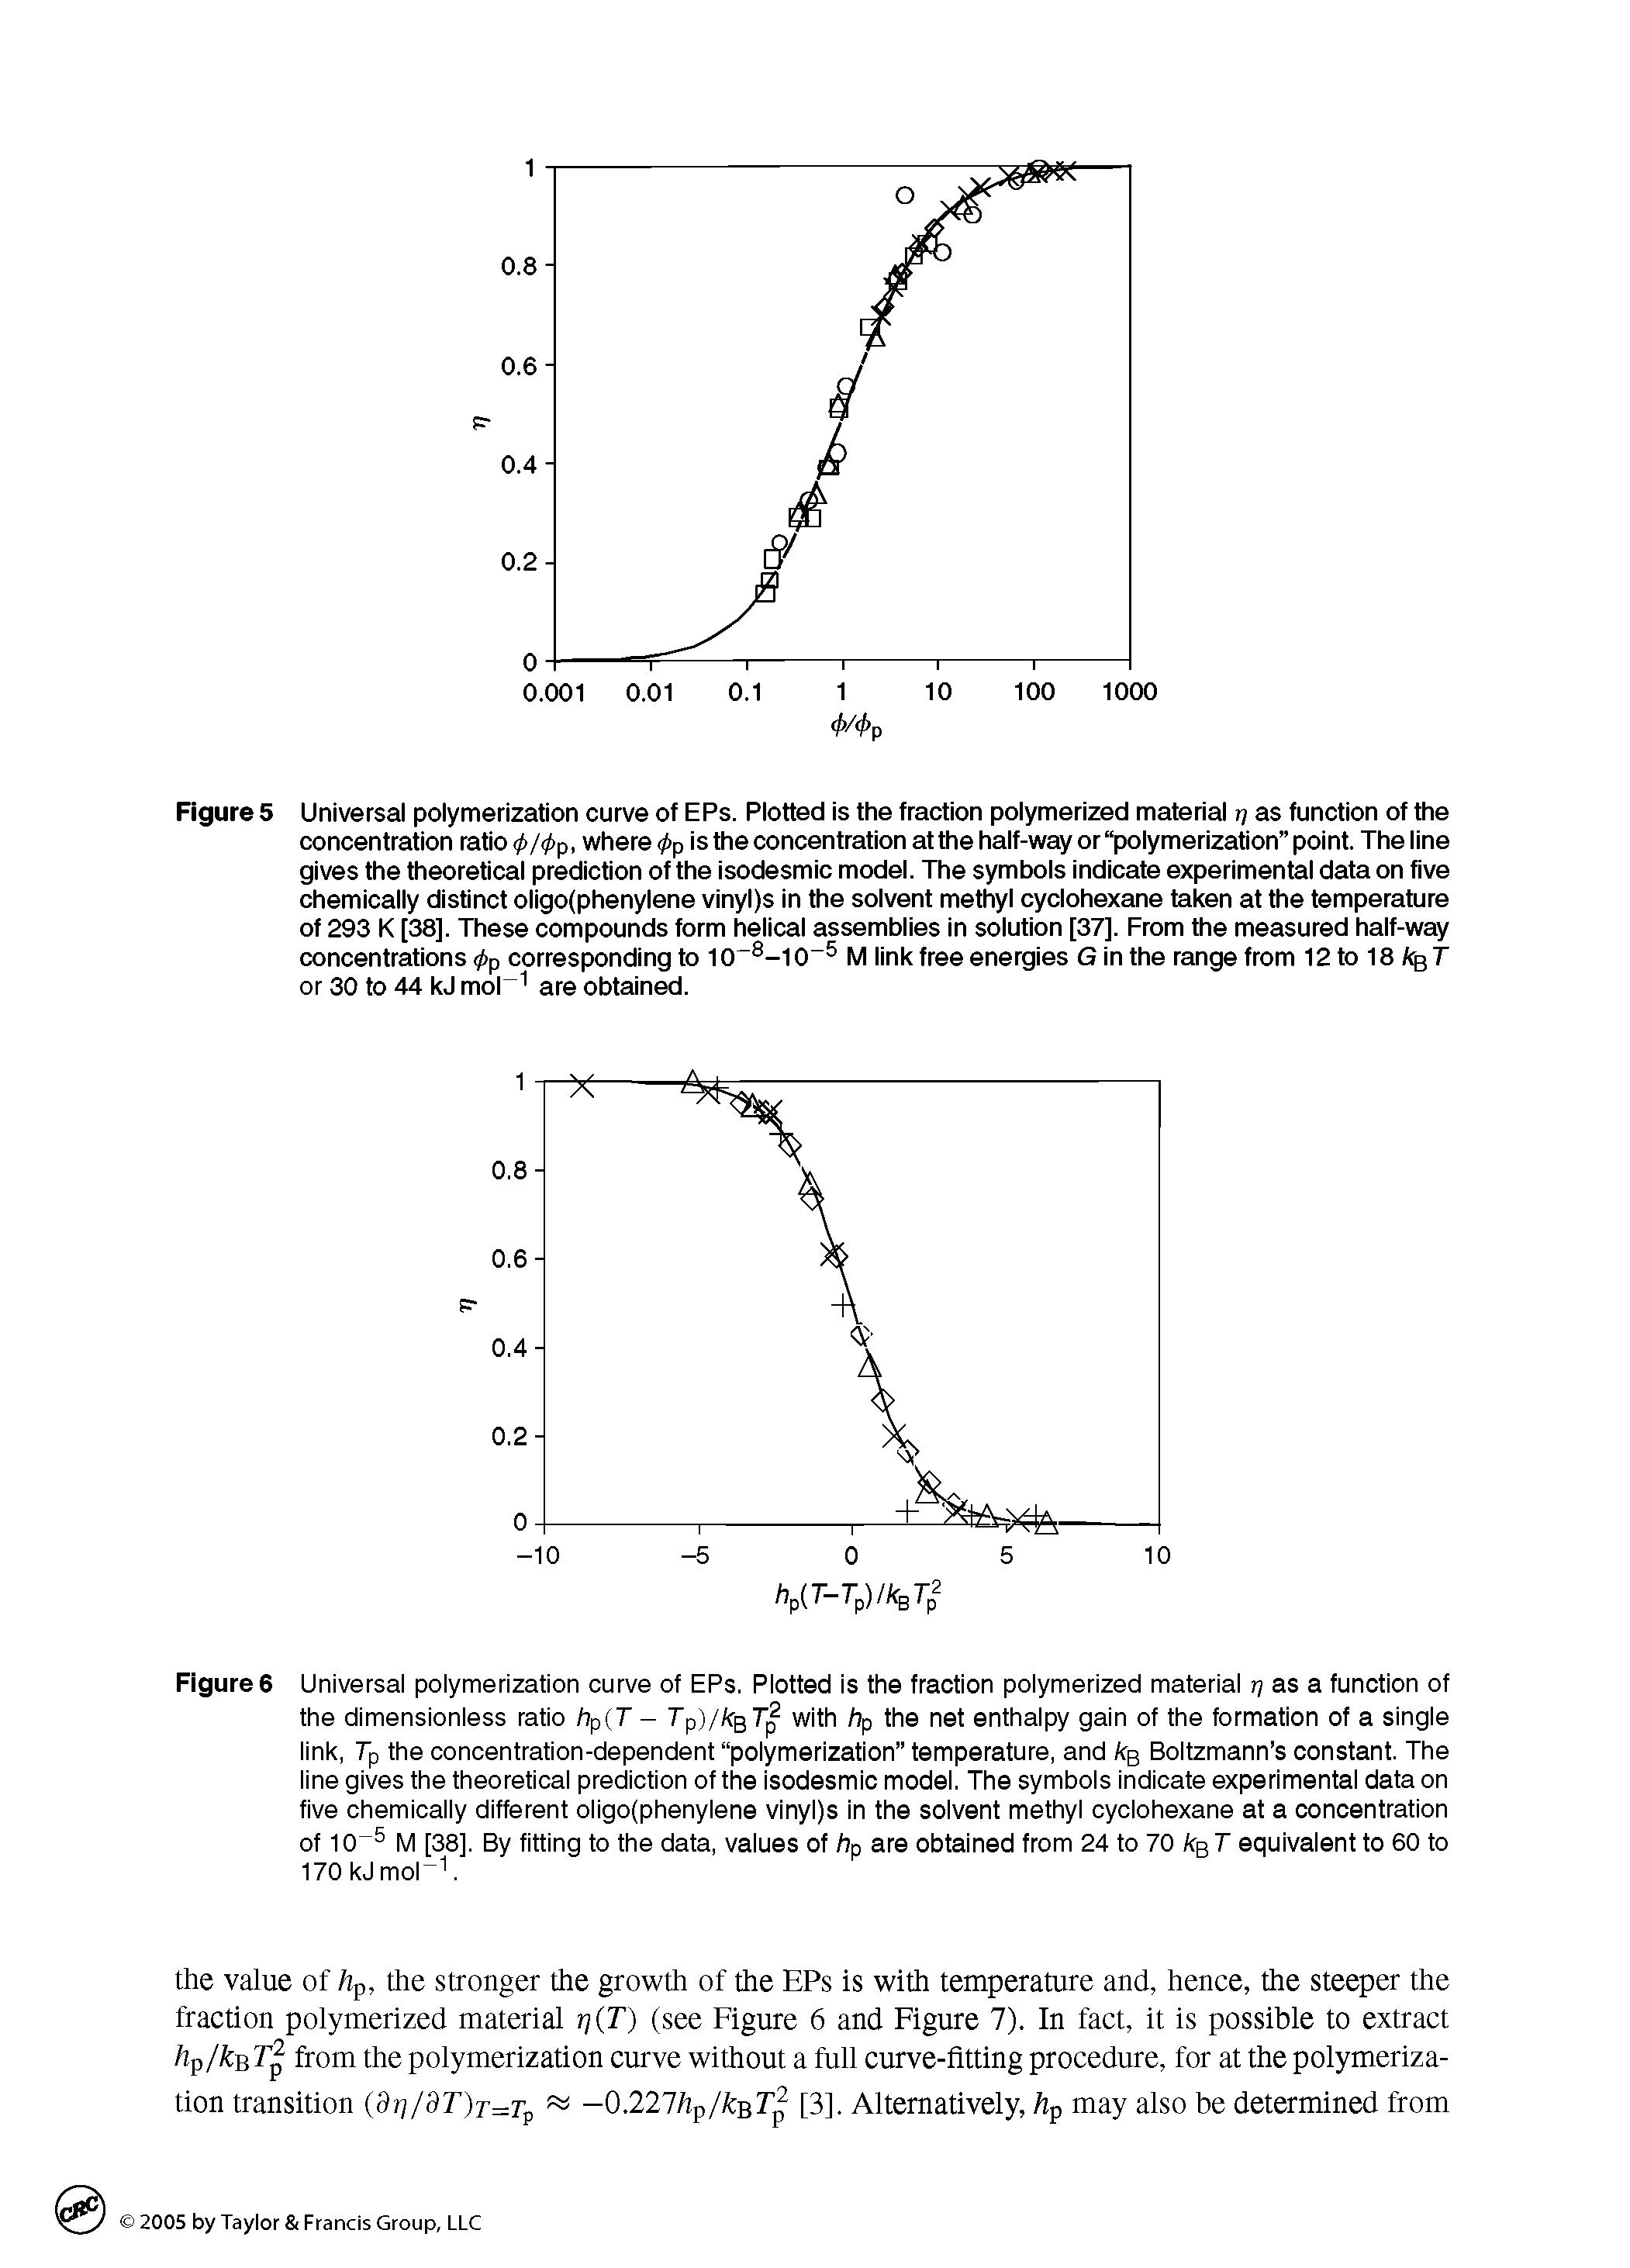 Figures Universal polymerization curve of EPs. Plotted is the fraction polymerized material as a function of the dimensionless ratio hp T - Tp)/kBT with hp the net enthalpy gain of the formation of a single link, Tp the concentration-dependent polymerization temperature, and kg Boltzmann s constant. The line gives the theoretical prediction of the isodesmic model. The symbols Indicate experimental data on five chemically different ollgo(phenylene vlnyl)s In the solvent methyl cyclohexane at a concentration of 1M [38], By fitting to the data, values of hp are obtained from 24 to 70 kg T equivalent to 60 to 170 kJ mol". ...